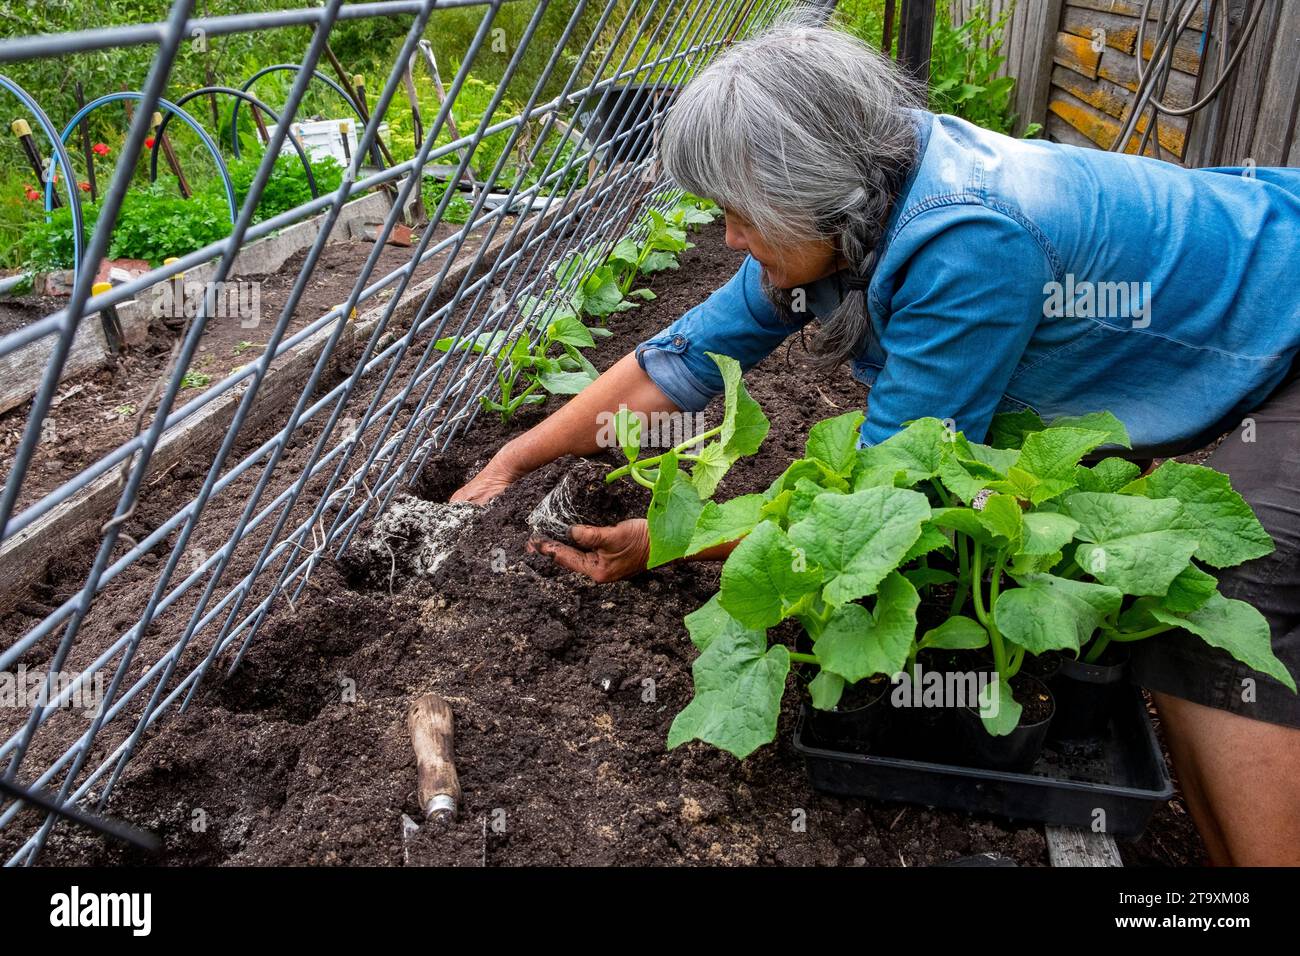 Planting cucumber seedlings against a slanted grid to climb on the grid Stock Photo